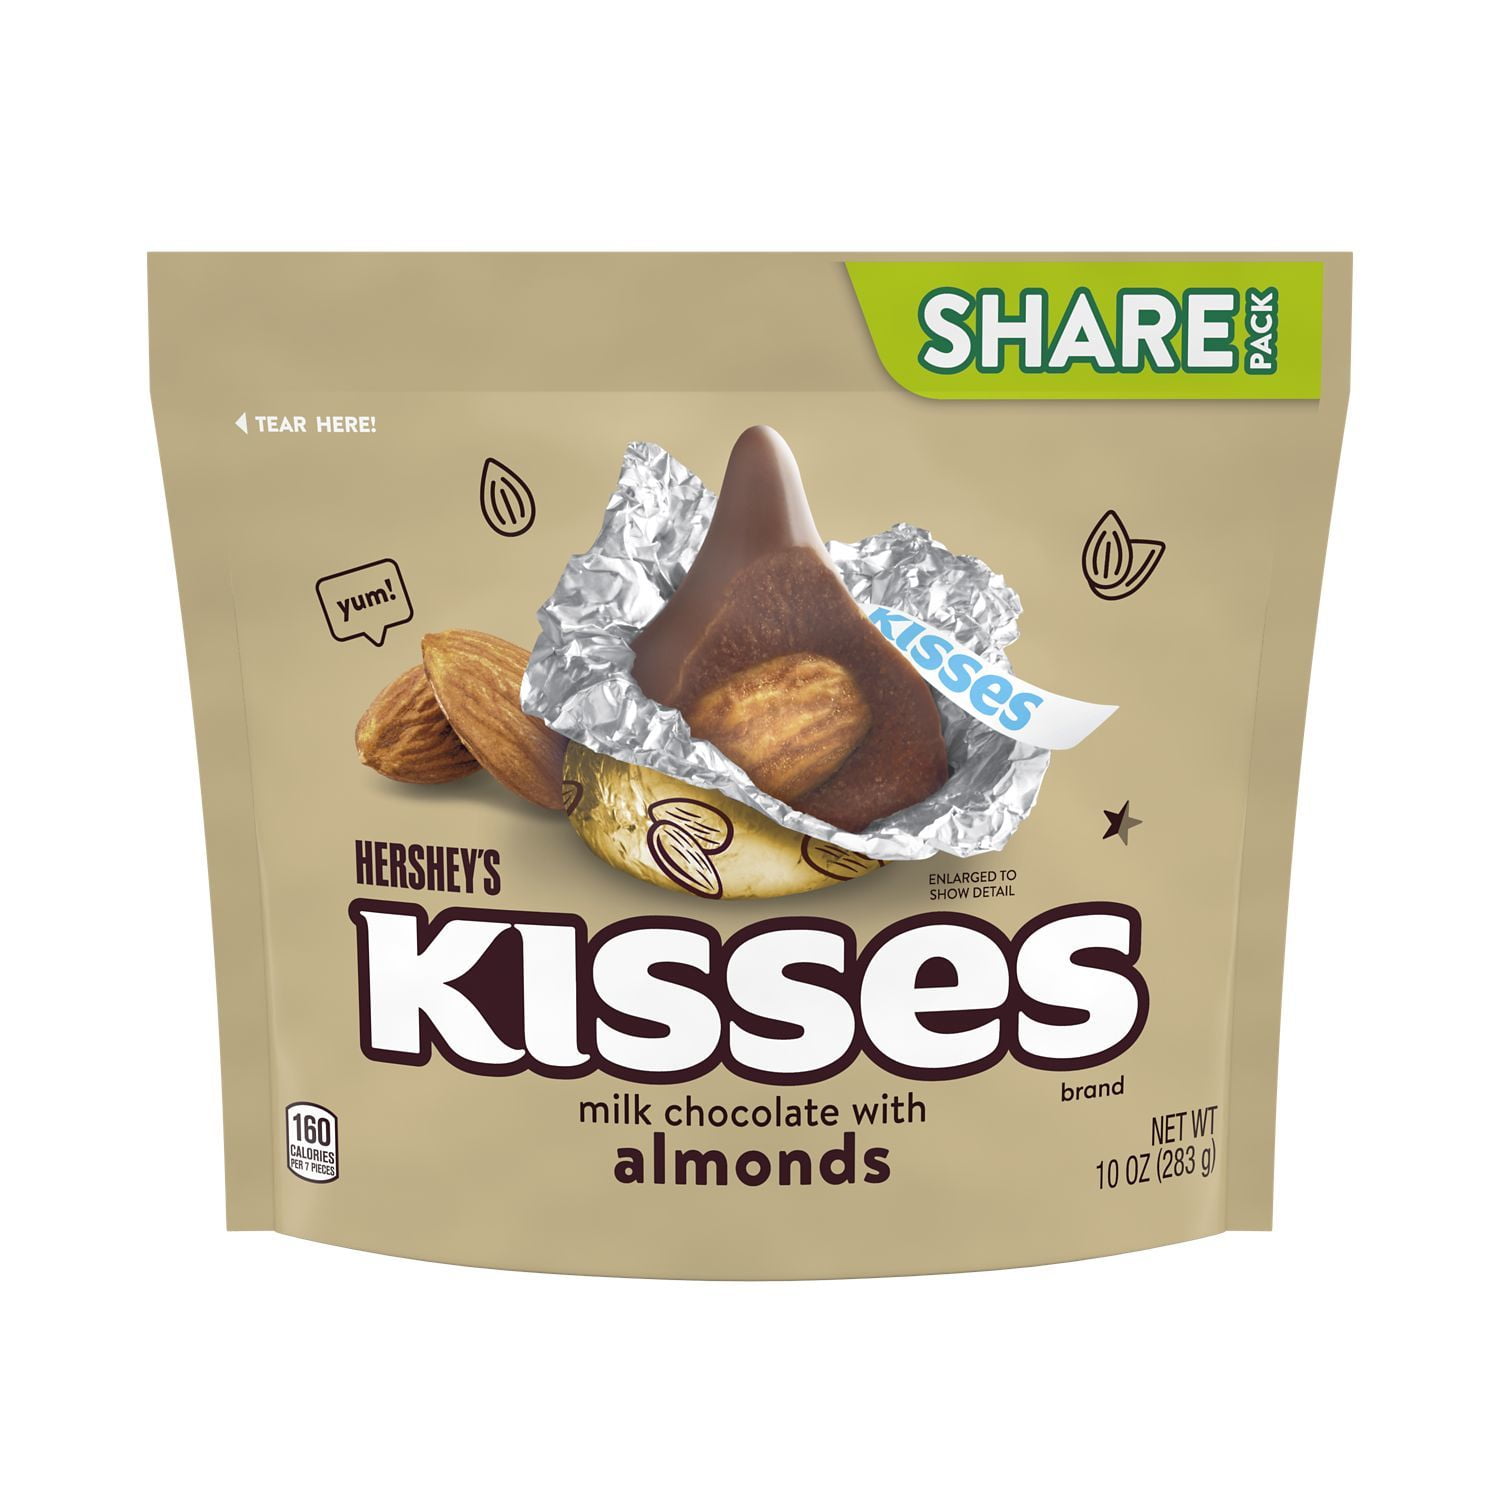 HERSHEY'S, KISSES Milk Chocolate and Almond Candy, Share Size, 10 oz, Share Bag